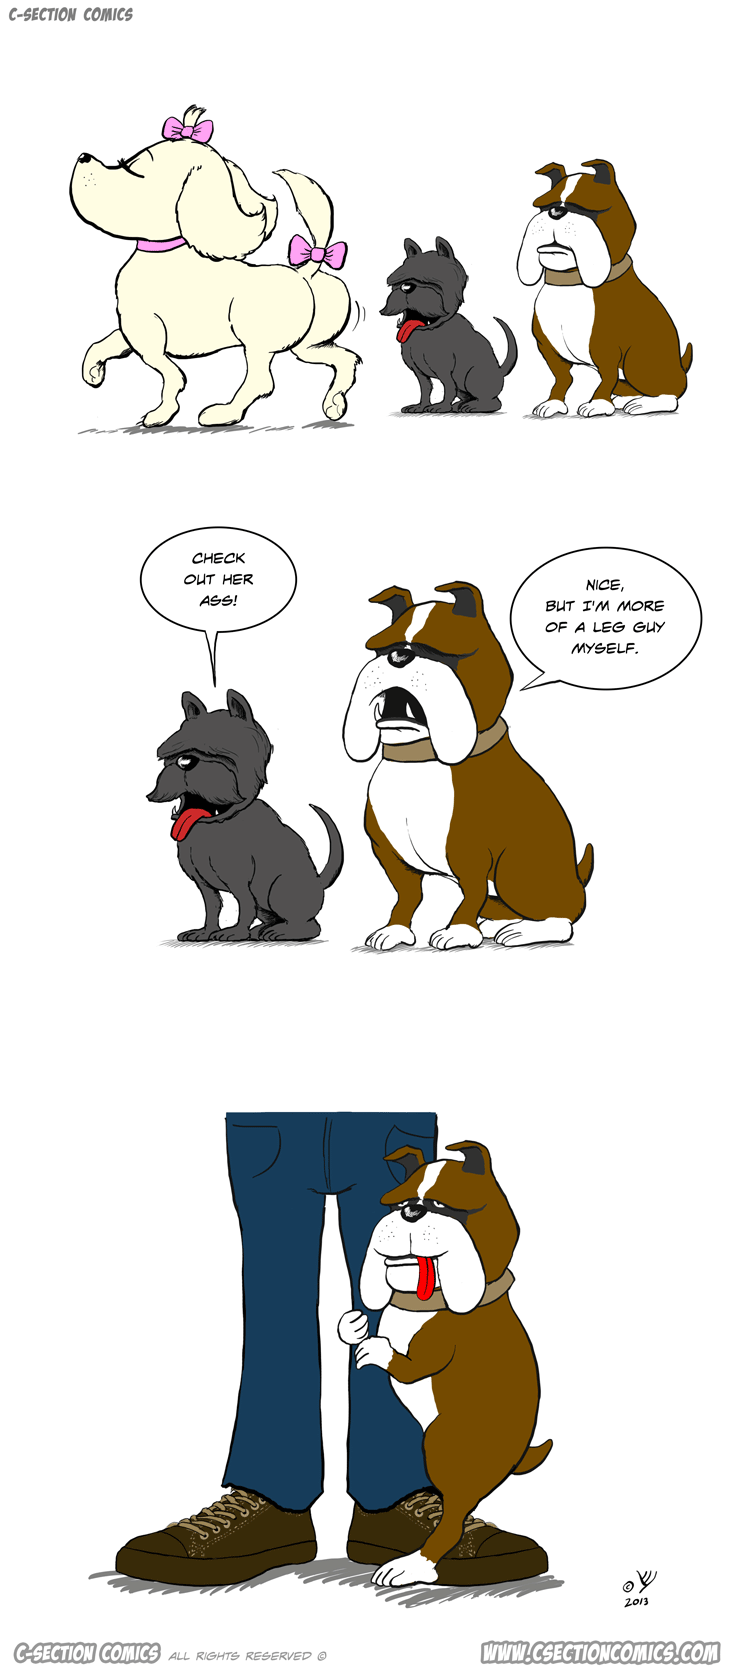 There Are Two Types of Dogs - C-Section Comics